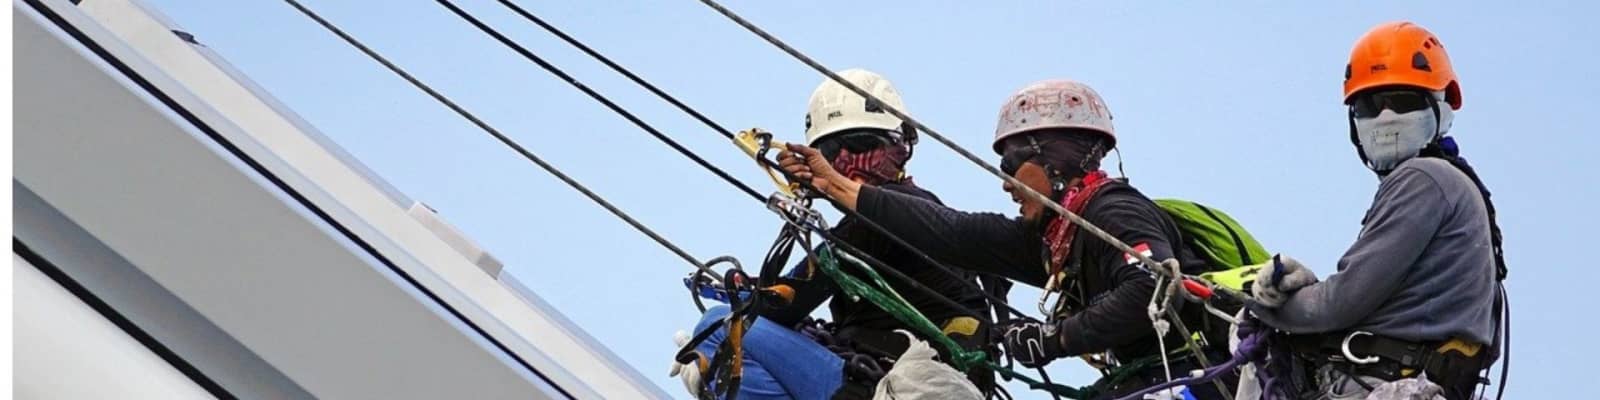 rope access pros in Kempton Park